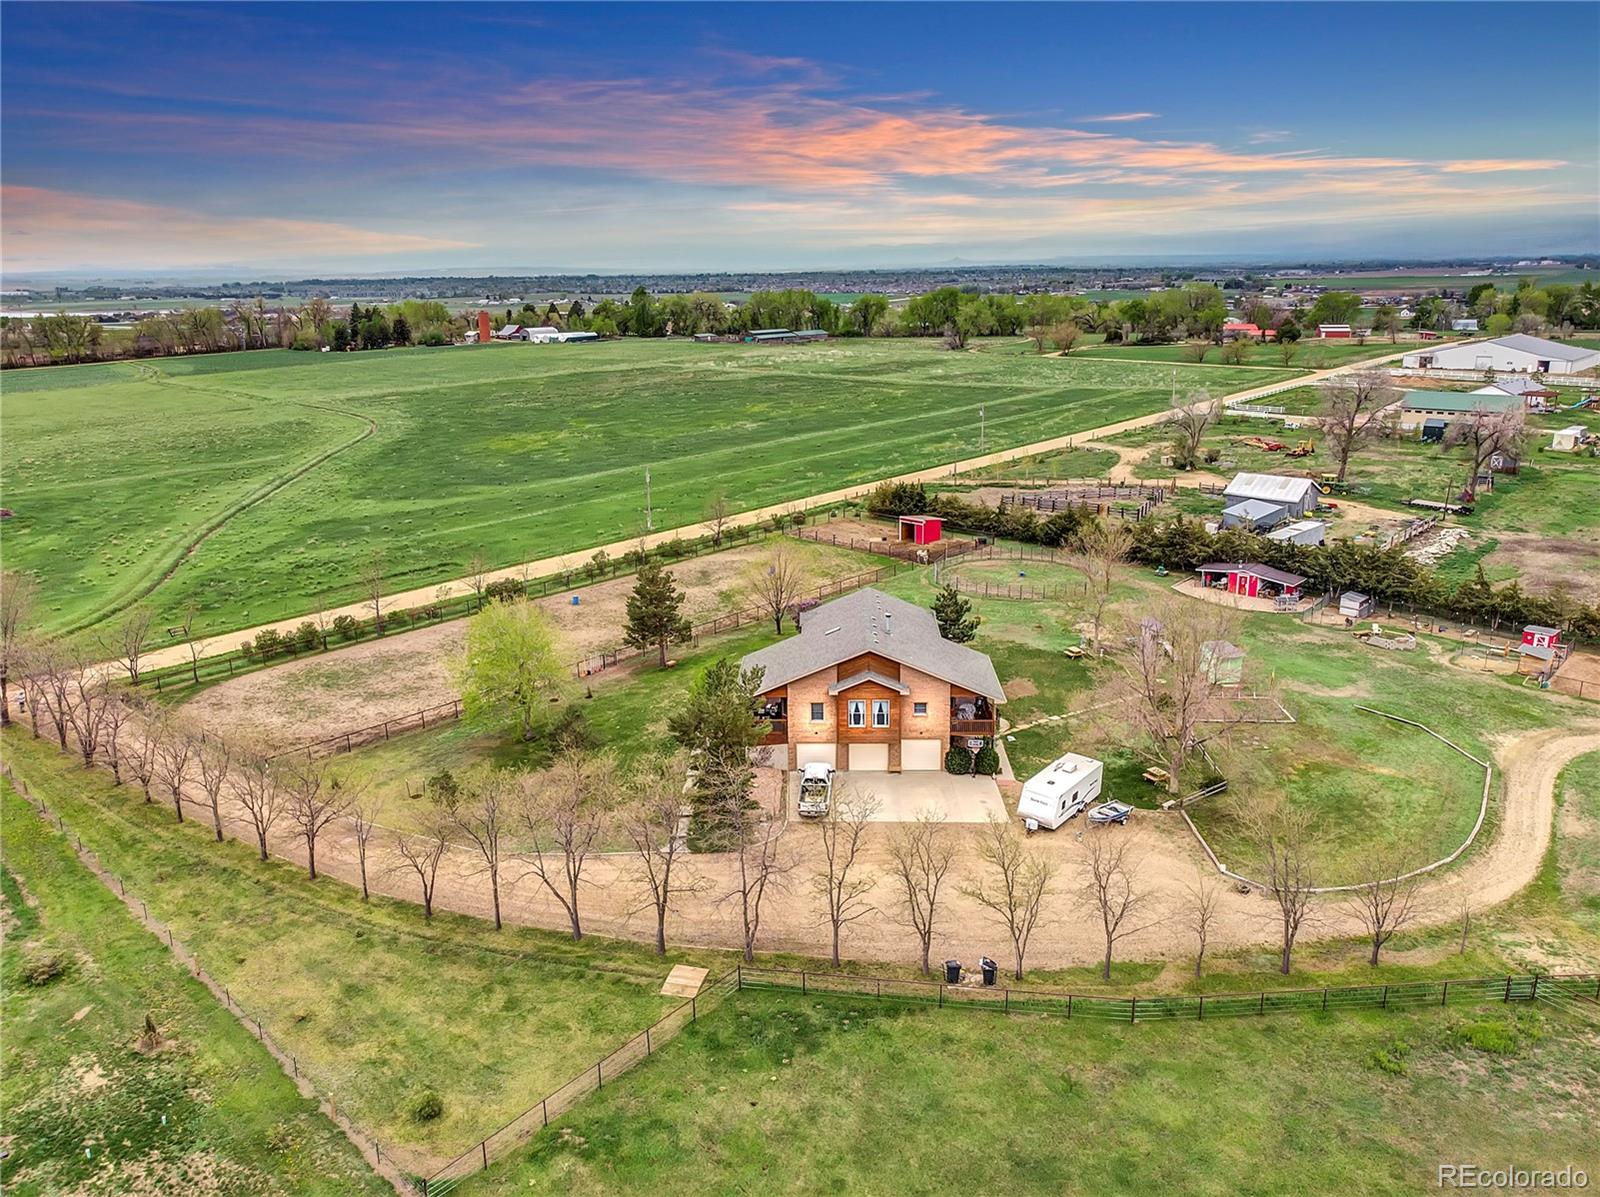 14737  county road 3 , longmont sold home. Closed on 2024-03-28 for $1,150,000.